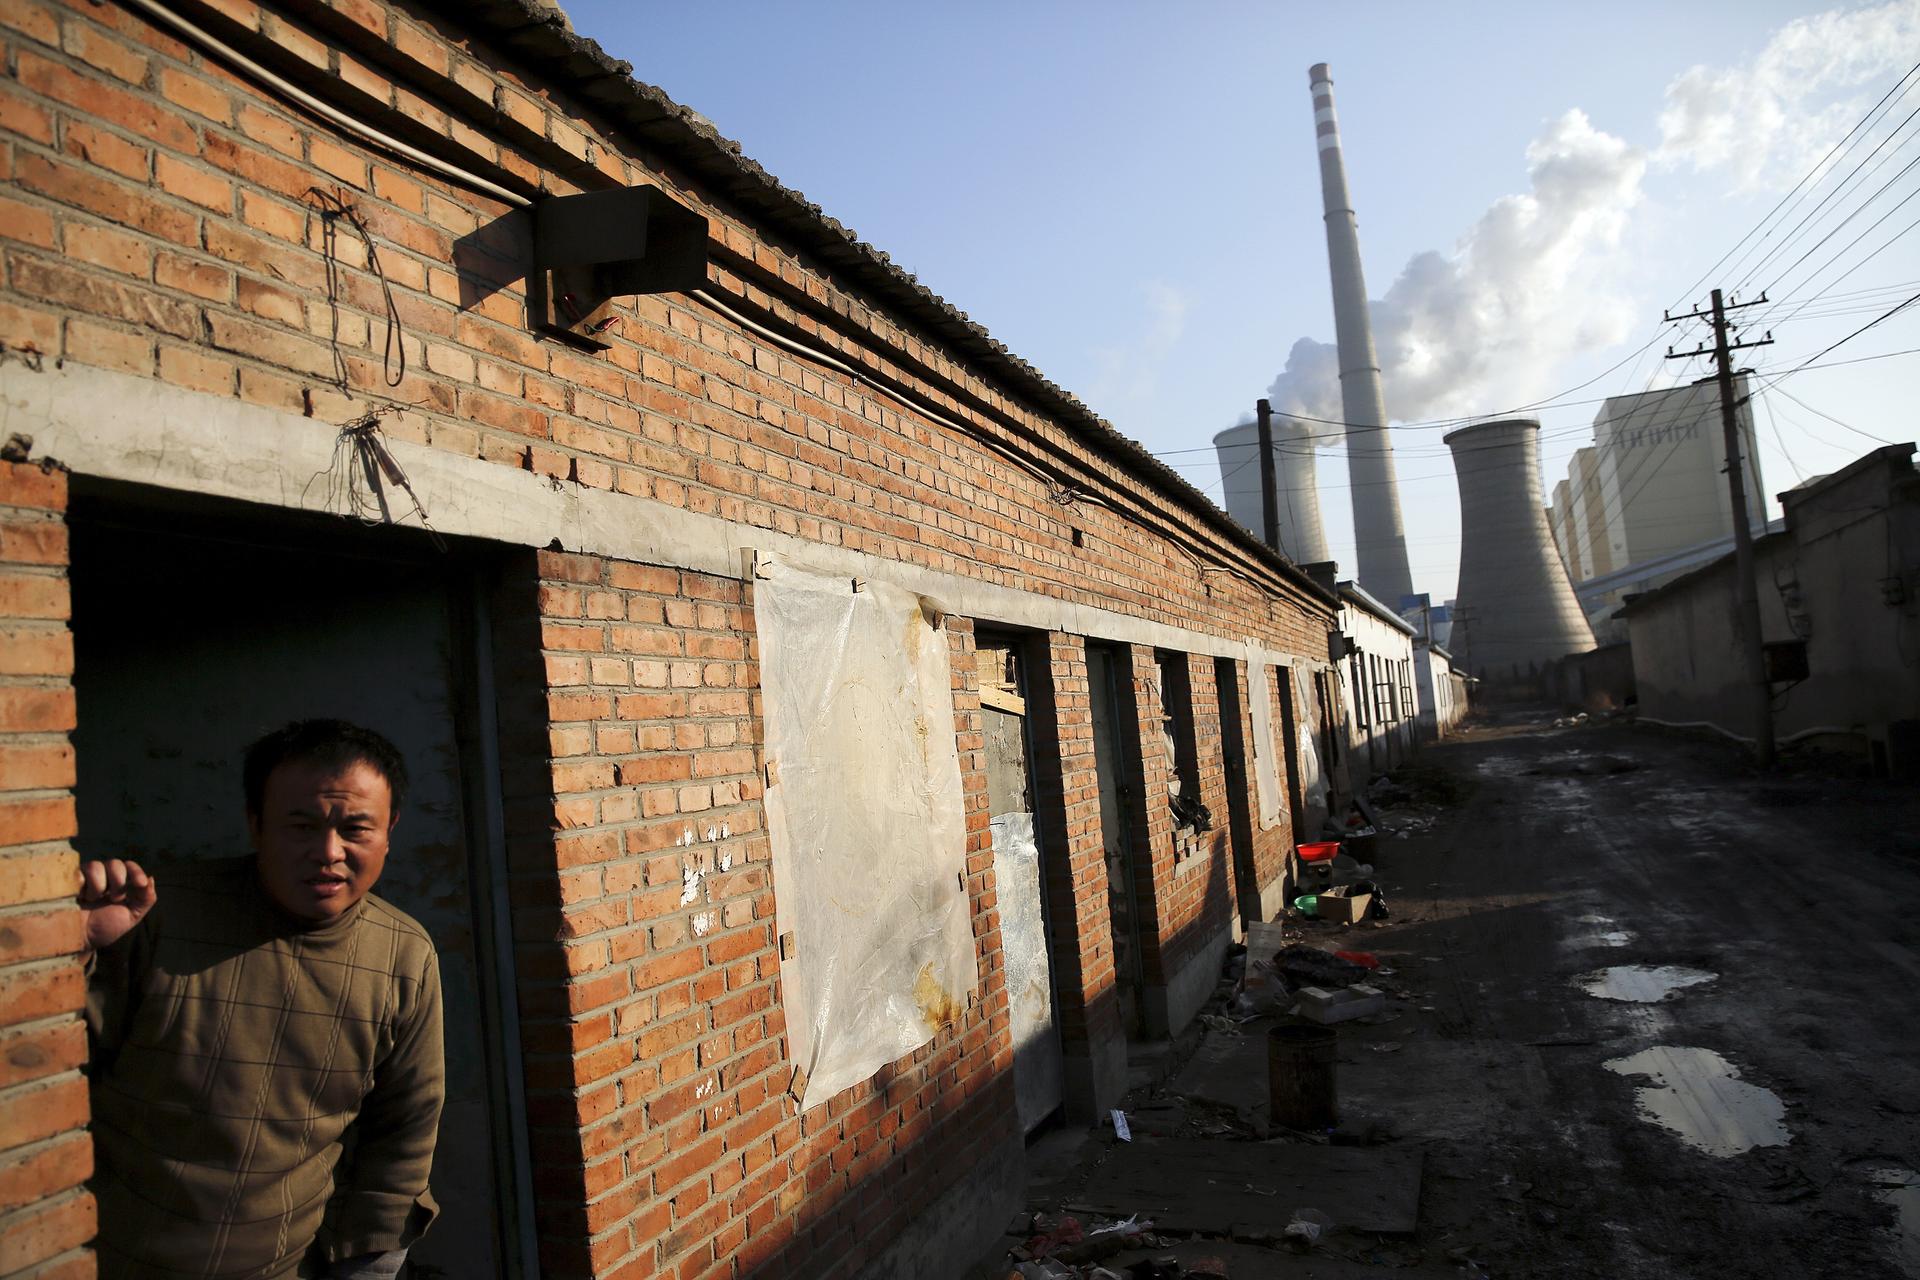 A man leans out of the door of his house down the street from large coal power plant smokestacks in Beijing.